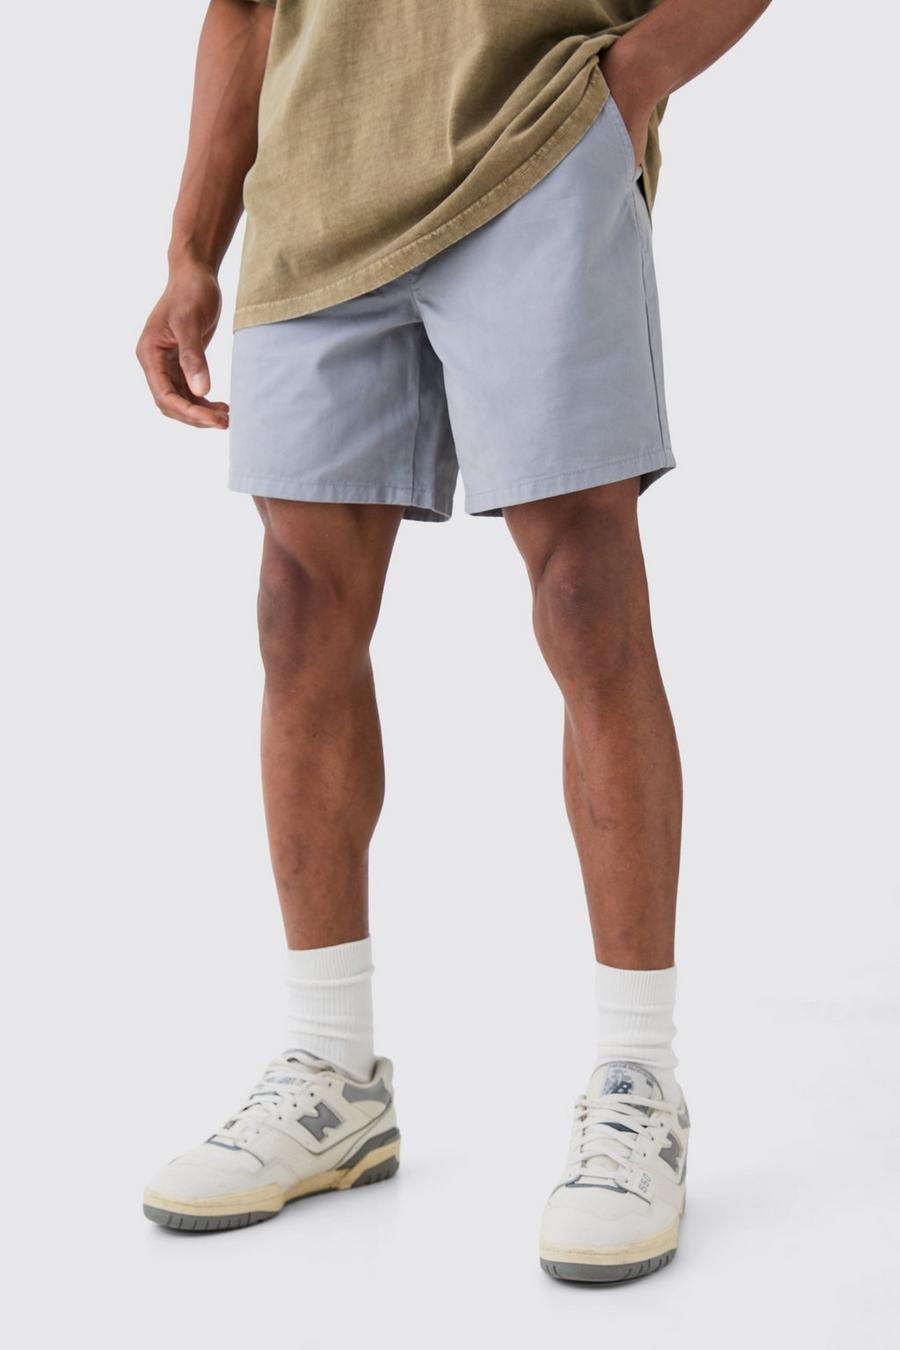 Shorter Length Relaxed Fit Elastic Waist Chino Shorts in Grey